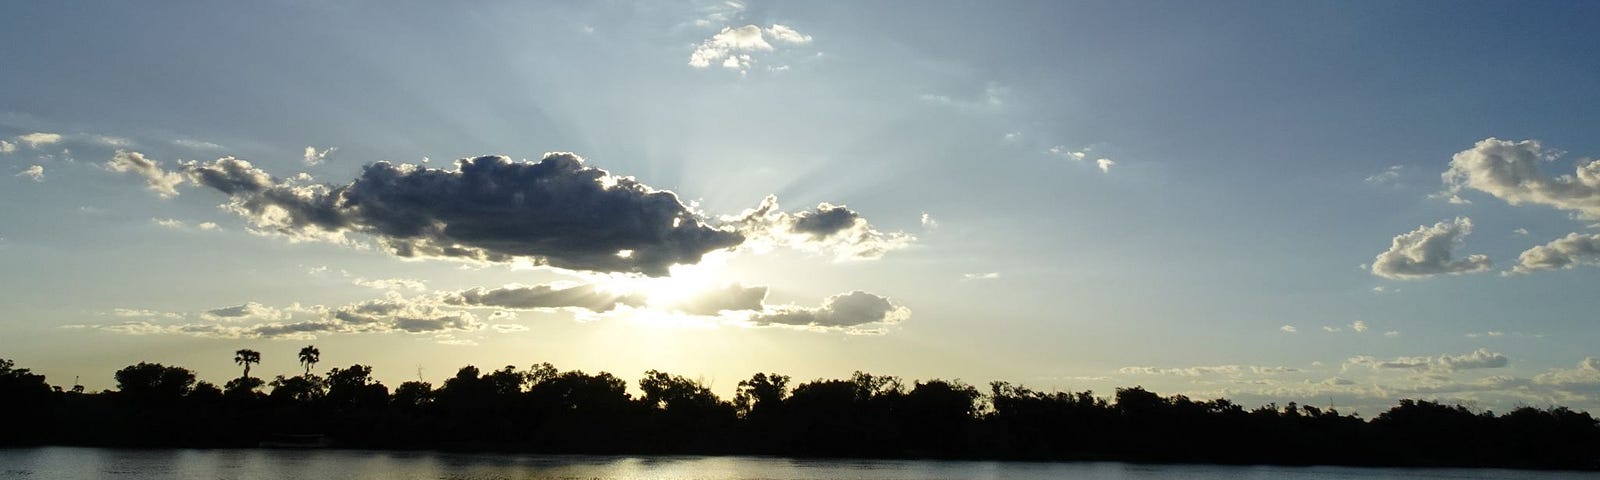 The golden light of the sun setting over a dark river and darker trees, partially behind clouds